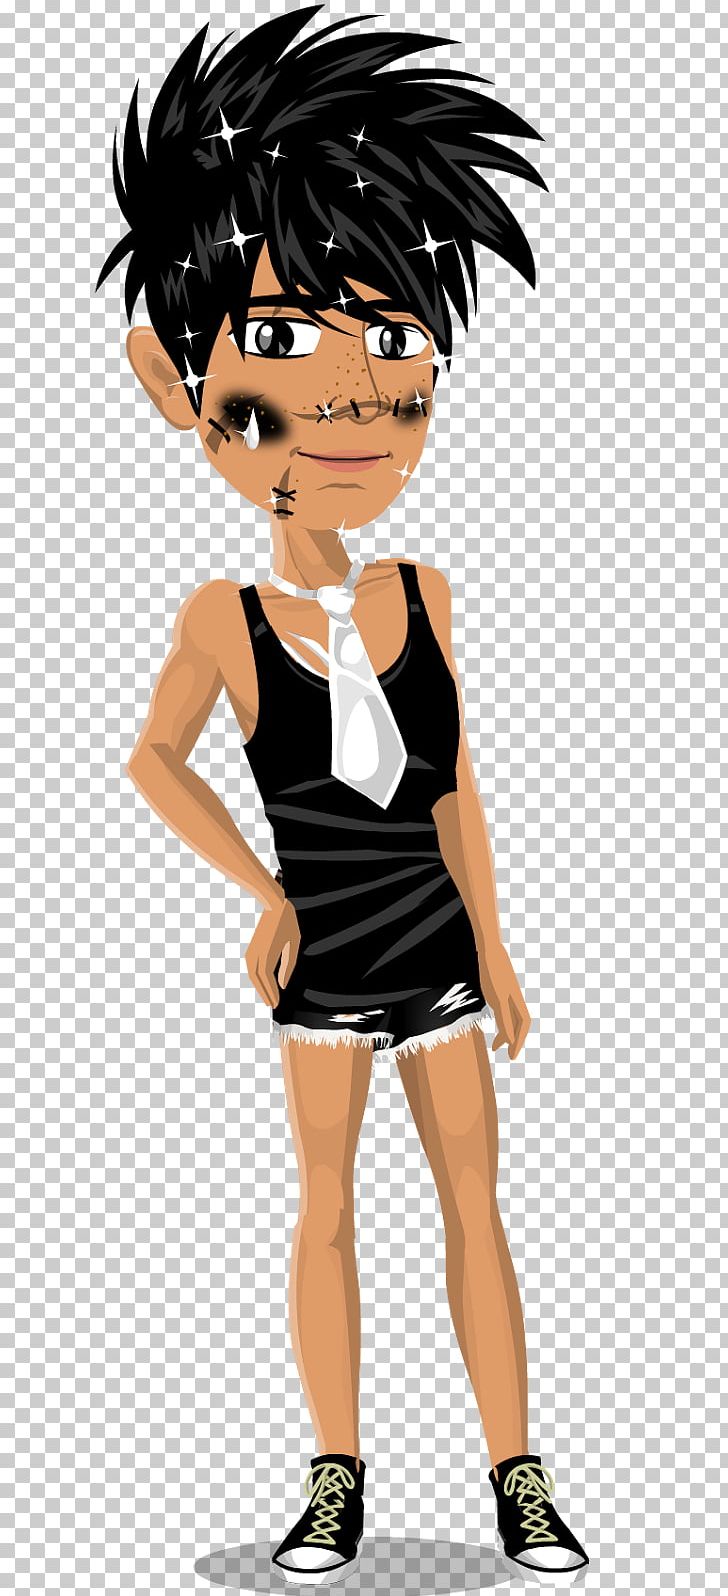 MovieStarPlanet Blog Video Game Character PNG, Clipart, Anime, Arm, Black, Black Hair, Blog Free PNG Download